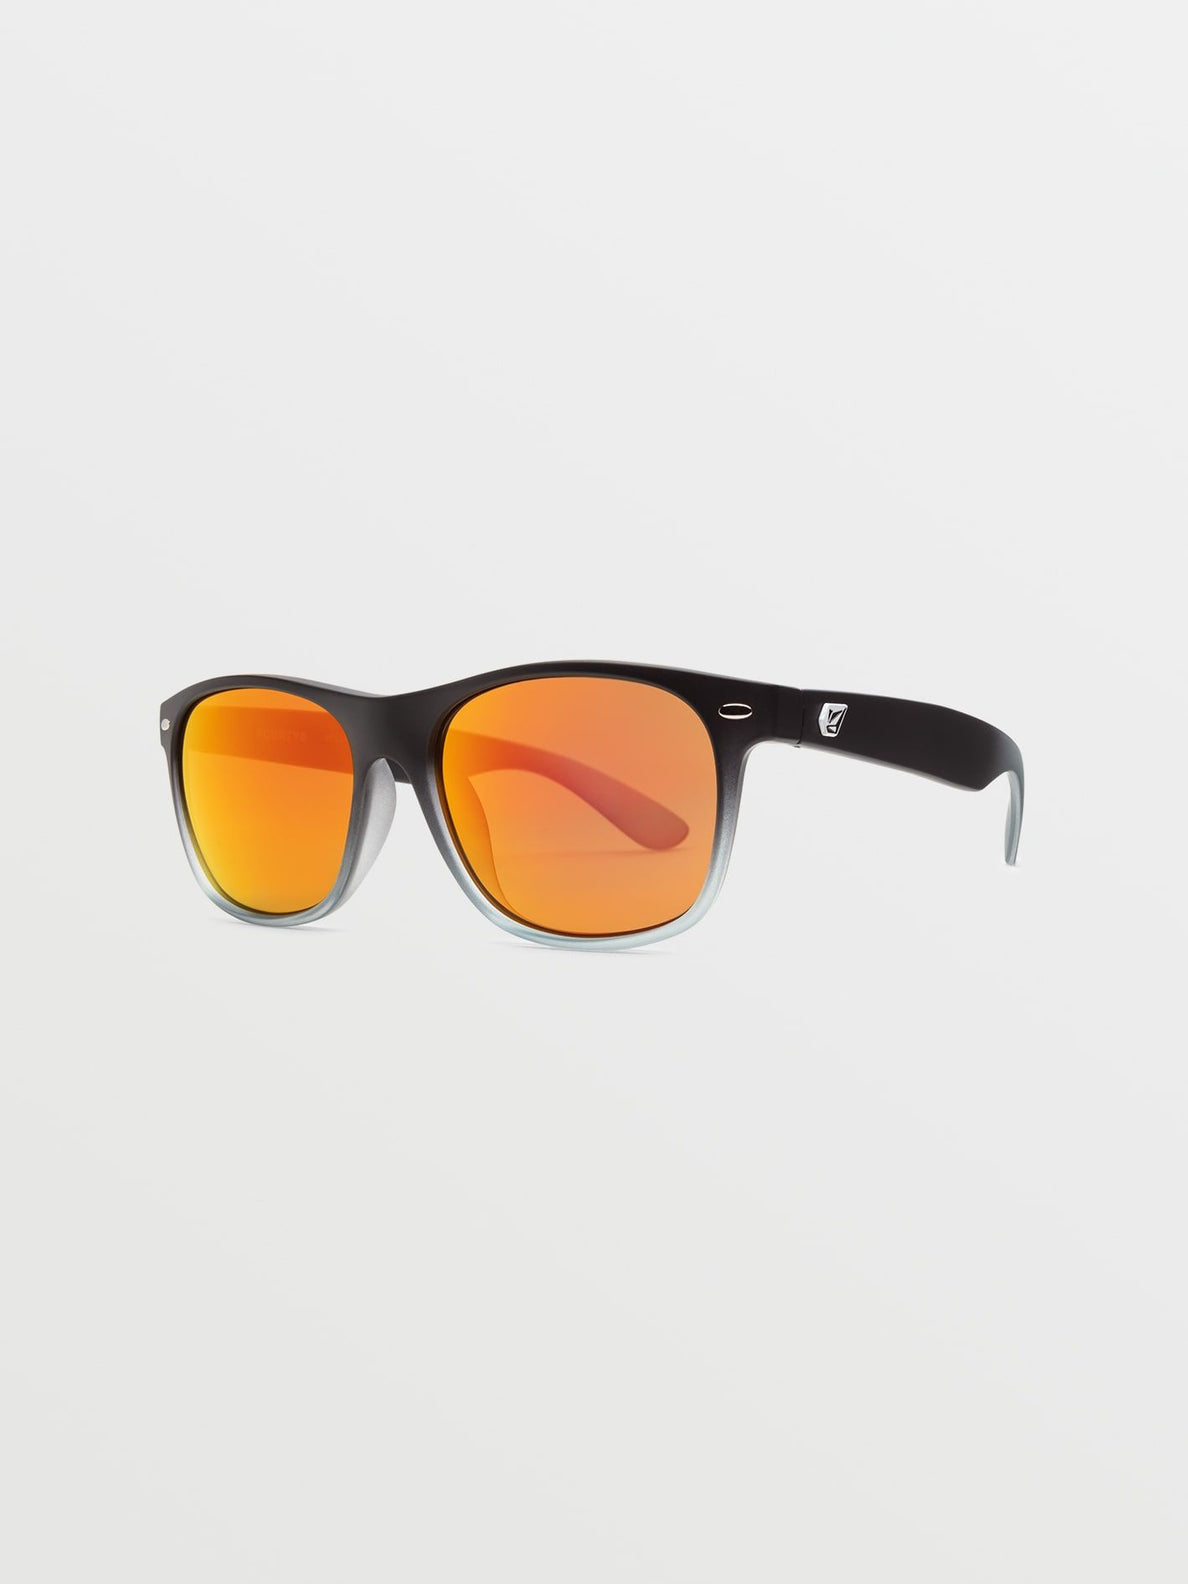 FOURTY6 SUNGLASSES - MATTE BLACK CLEAR FADE/GRAY RED MIRROR